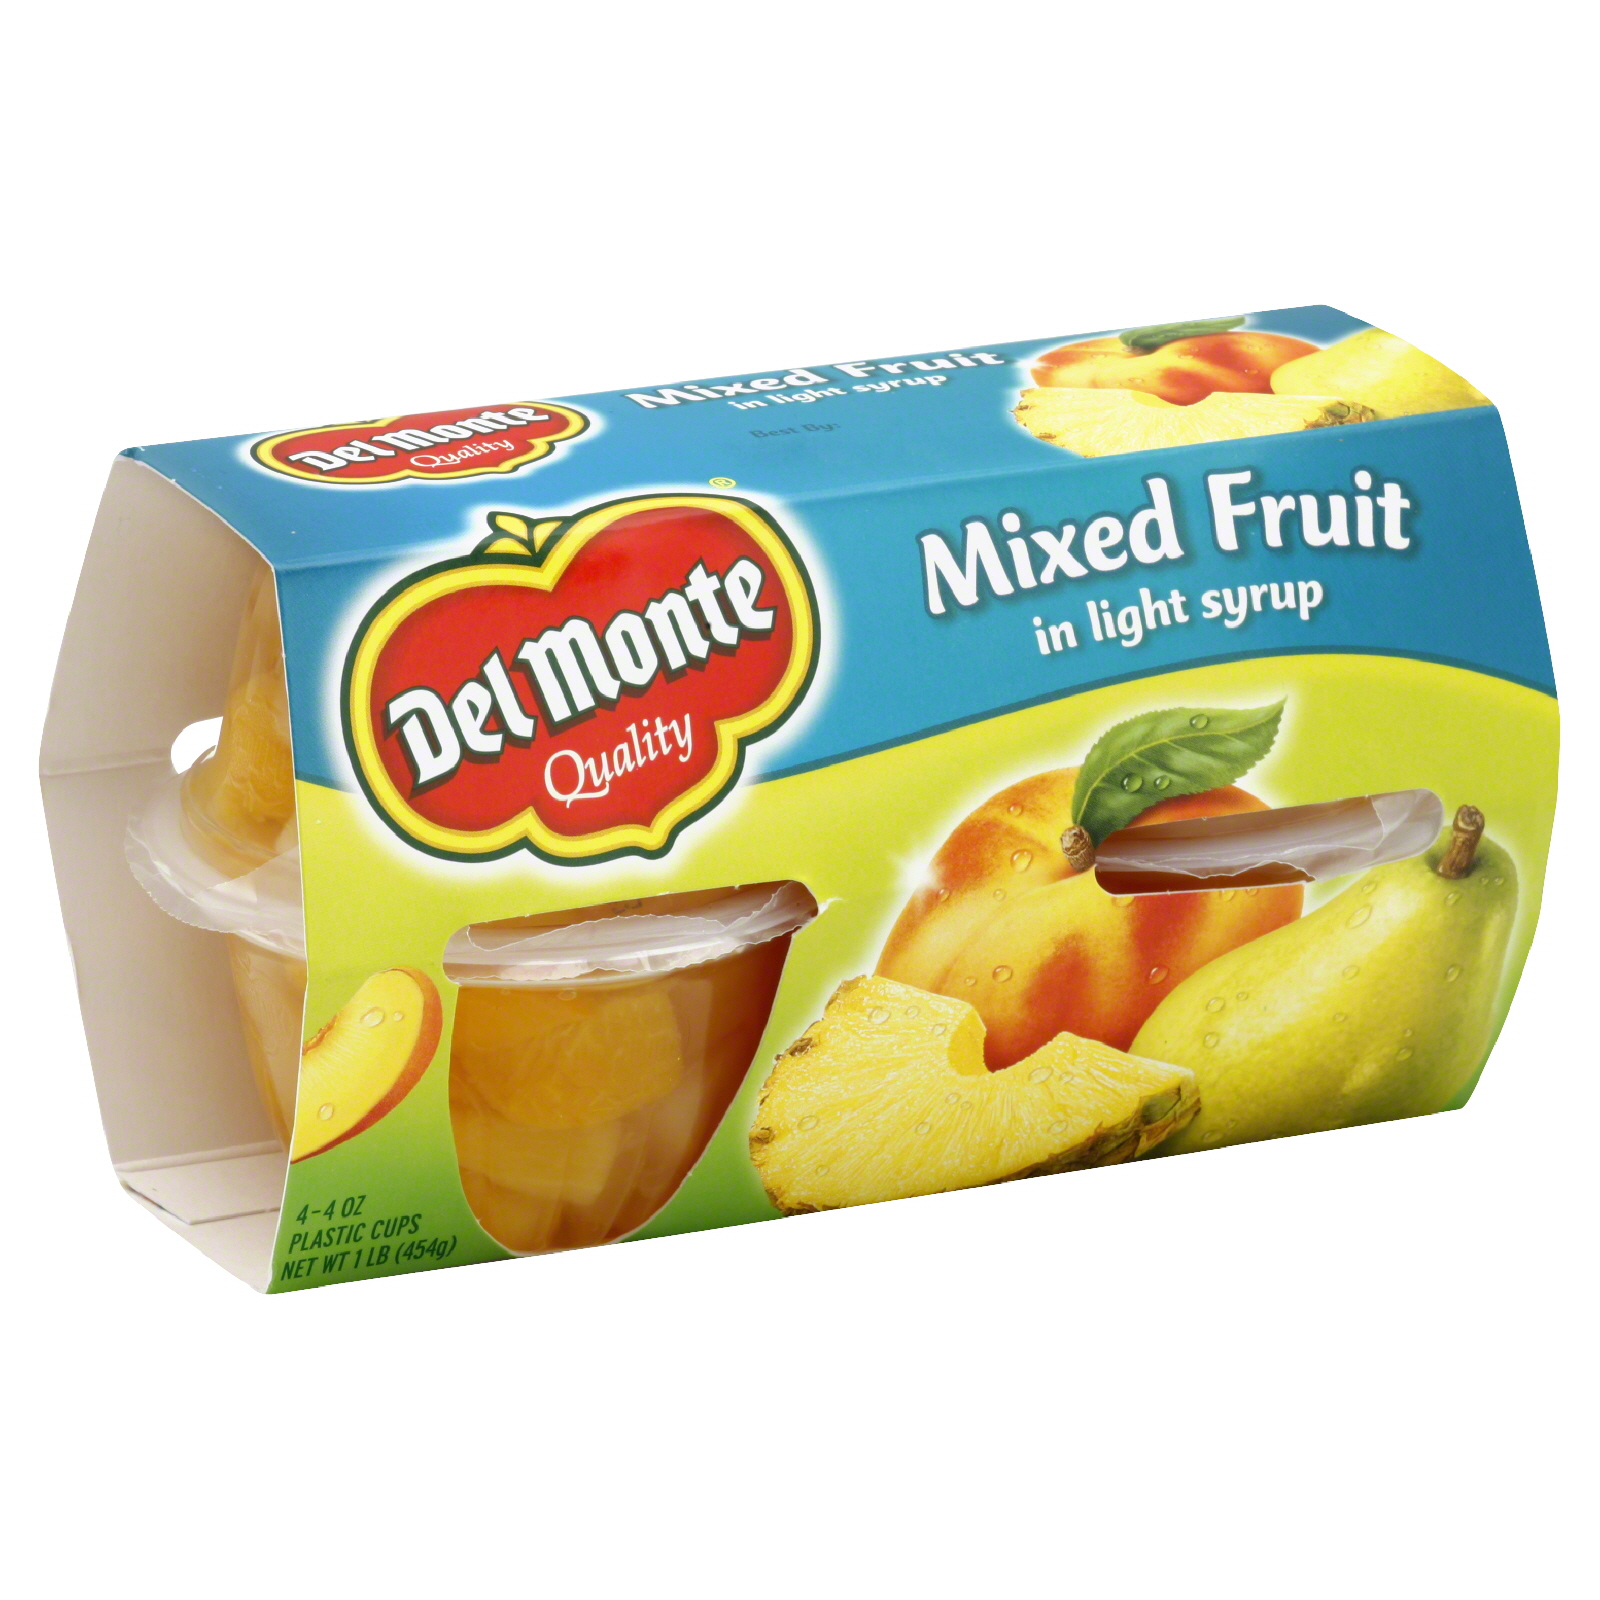 Del Monte Mixed Fruit, in Light Syrup, 4 - 4 oz cups [1 lb (453 g)]